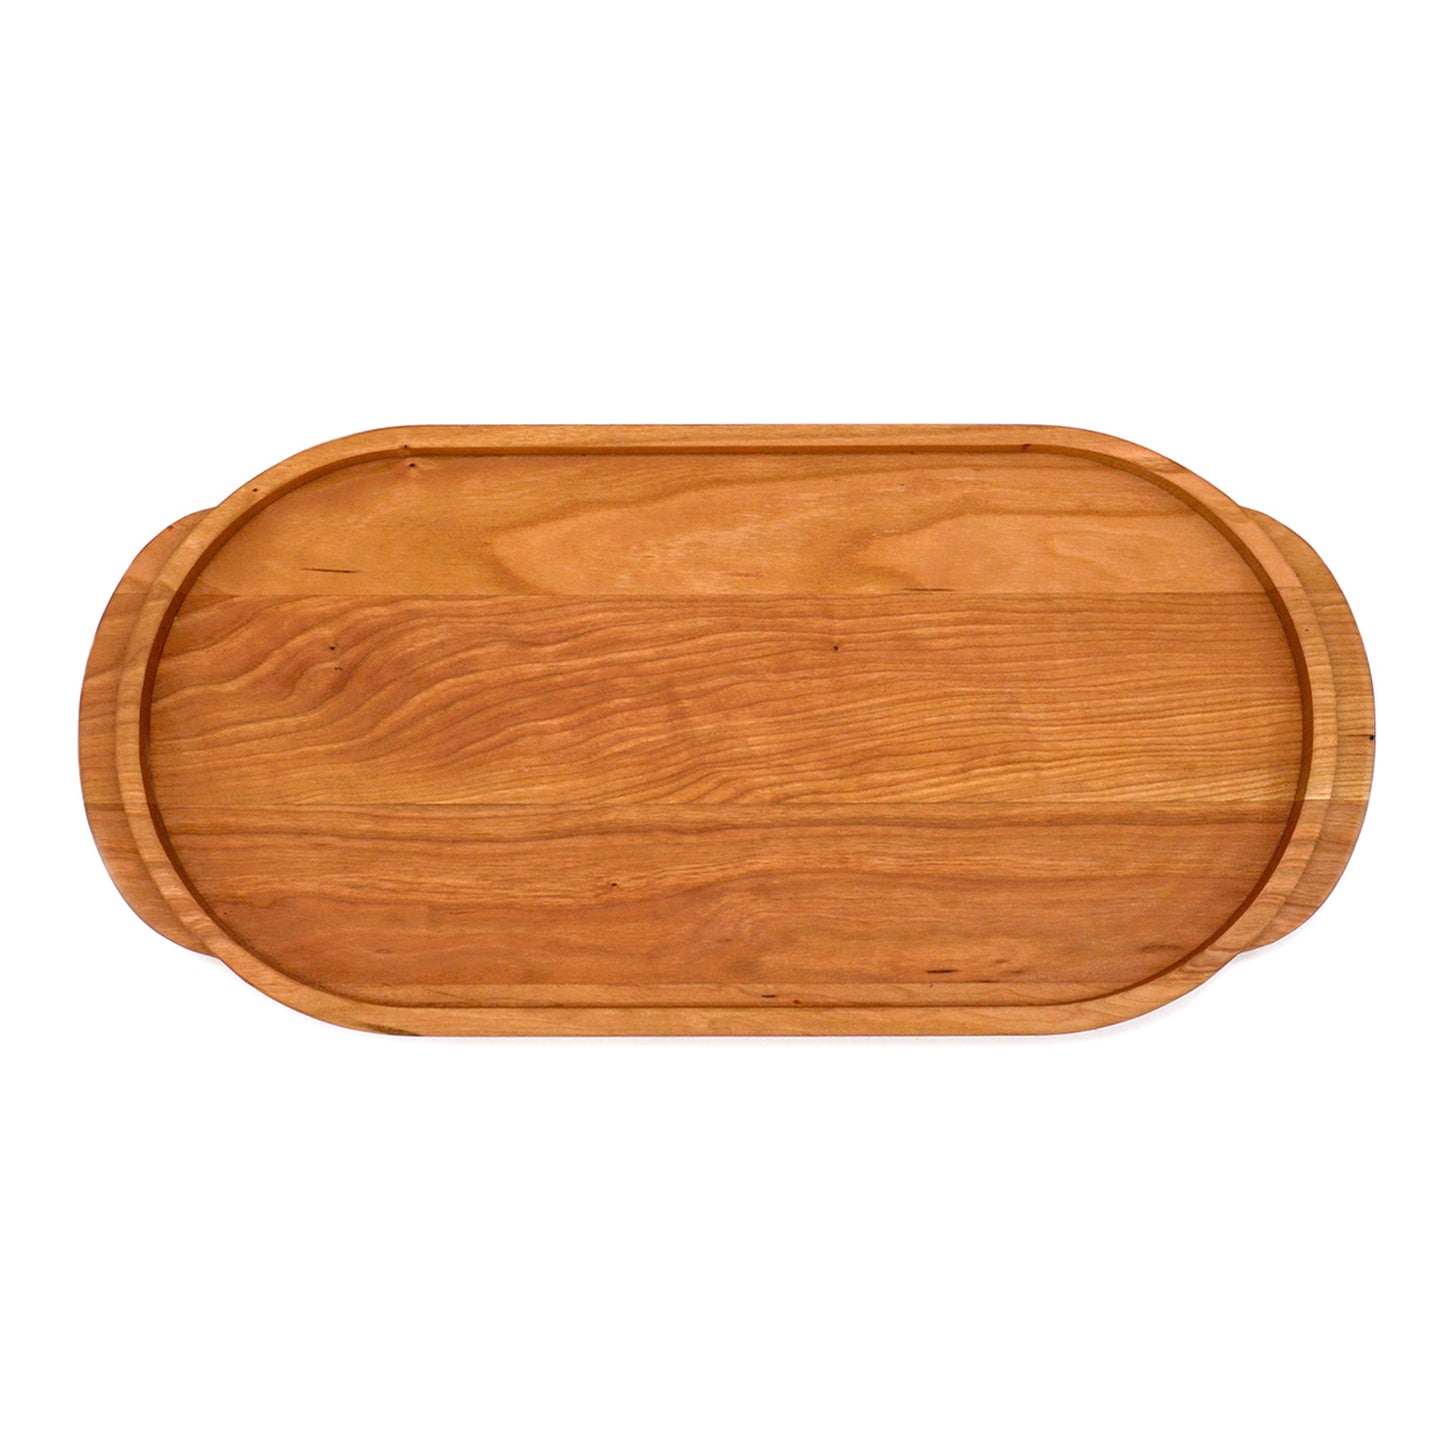 Cherry Oval Wooden Serving Tray-21 1/2" x 10"